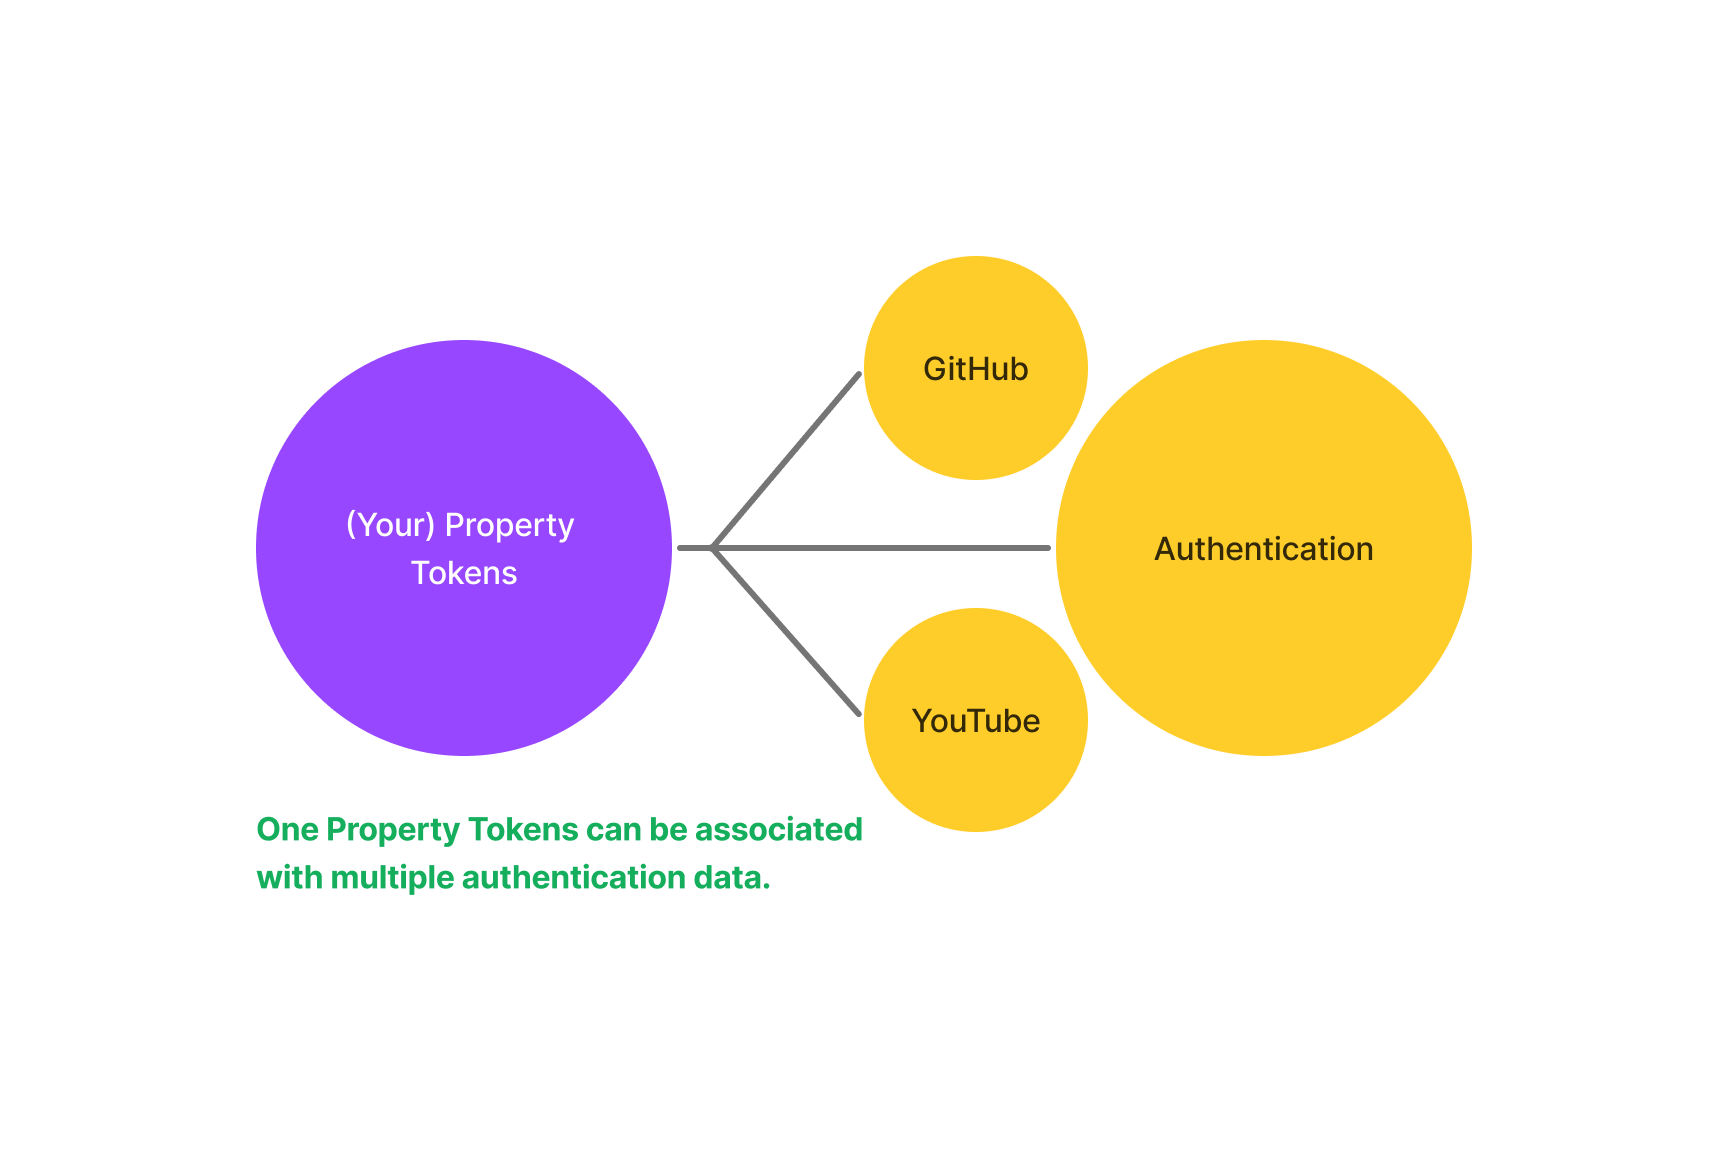 One Property Tokens can be associated with multiple authentication data.